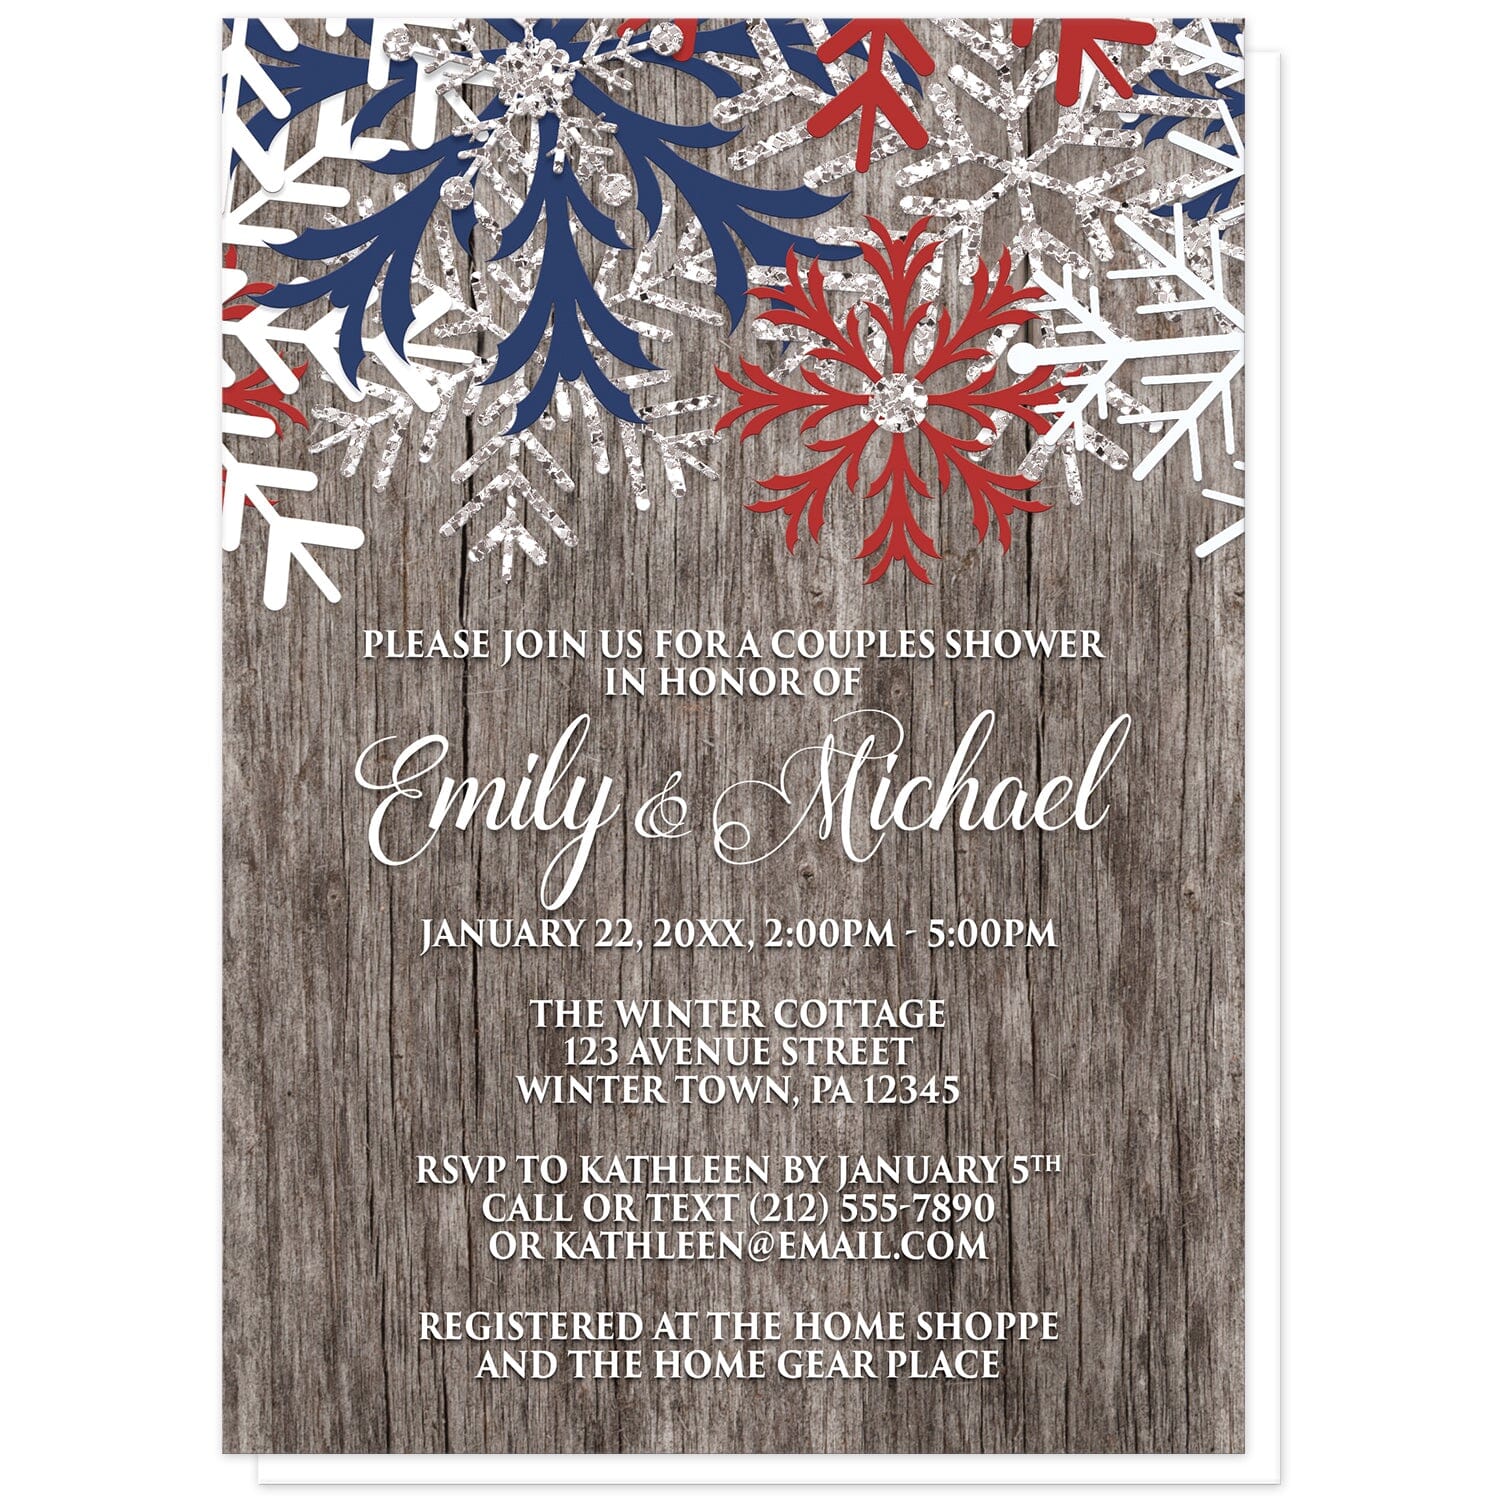 Rustic Winter Wood Navy Maroon Snowflake Couples Shower Invitations at Artistically Invited. Country-inspired rustic winter wood navy maroon snowflake couples shower invitations designed with maroon red, navy blue, white, and silver-colored glitter-illustrated snowflakes along the top over a rustic wood pattern illustration. Your personalized couples shower celebration details are custom printed in white over the wood background below the snowflakes.